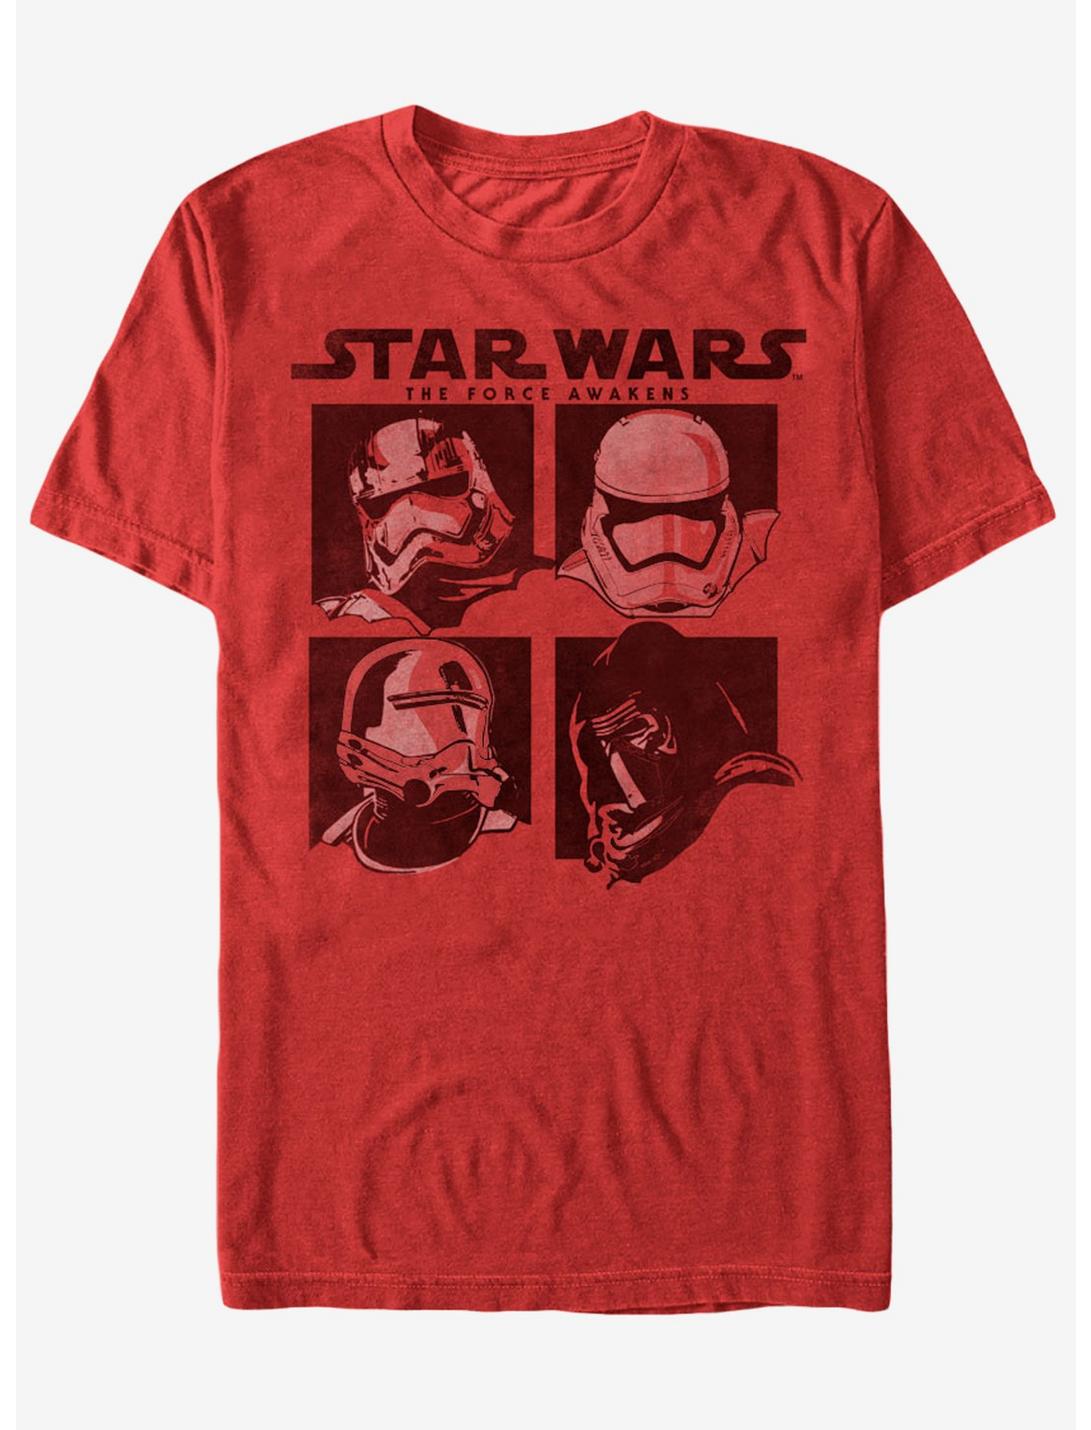 Star Wars The Force Awakens Stormtroopers and Kylo Ren T-Shirt, RED, hi-res